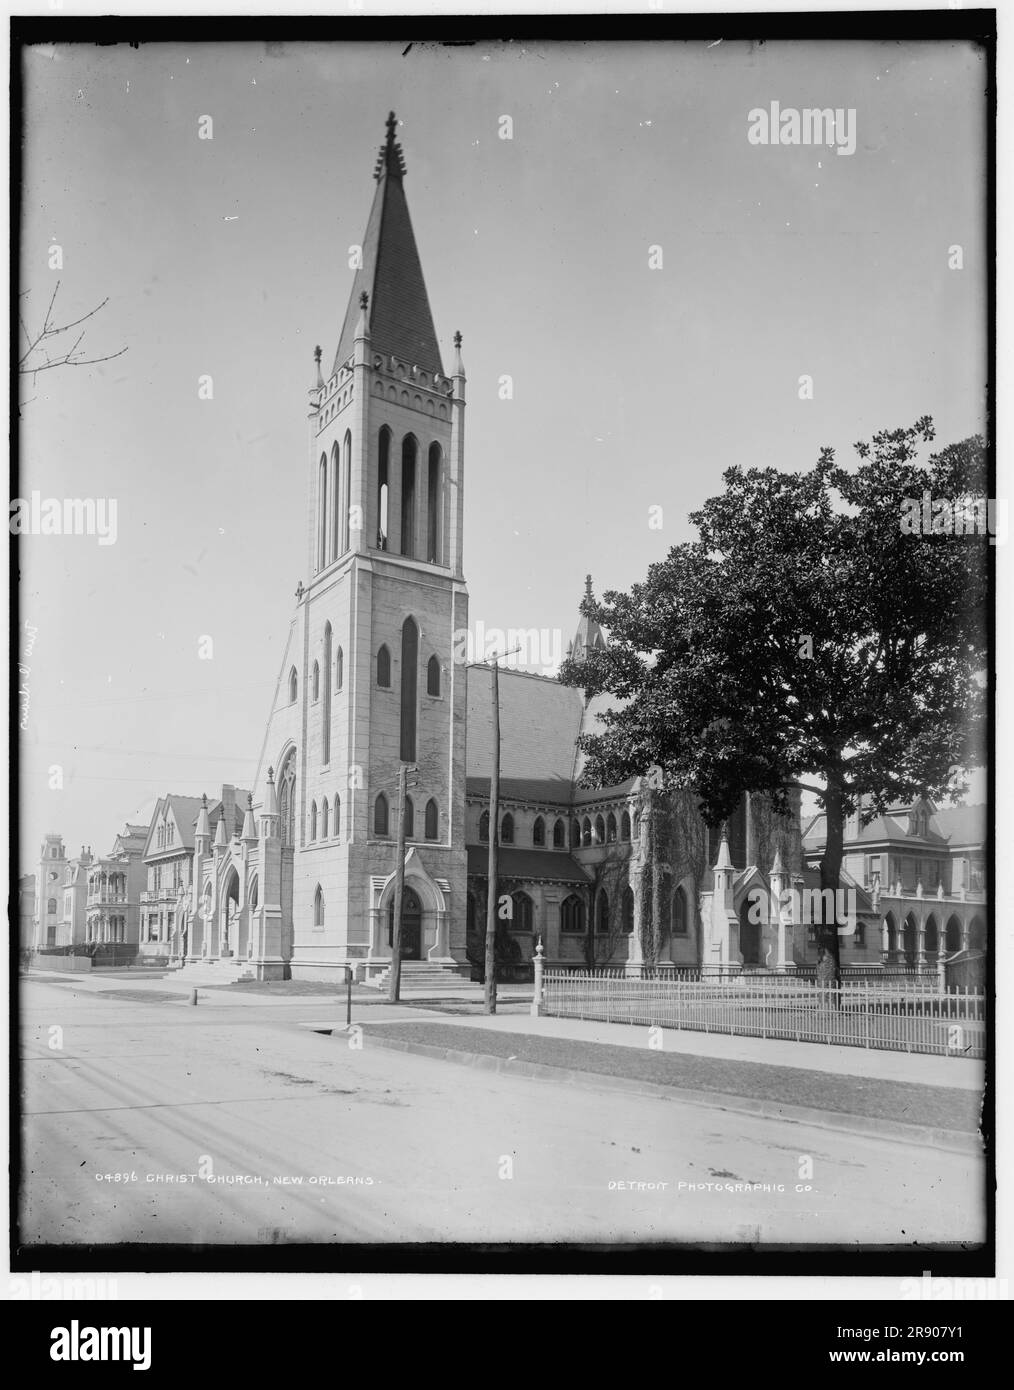 Christ Church, New Orleans, between 1890 and 1901. Protestant cathedral designed by Lawrence B. Valk. The steeple was destroyed in the Great New Orleans Hurricane of 1915. Valk's building is the fourth on the site - the original church was founded in 1803, the first non-Roman Catholic church founded in the entire Louisiana Purchase territory. Stock Photo